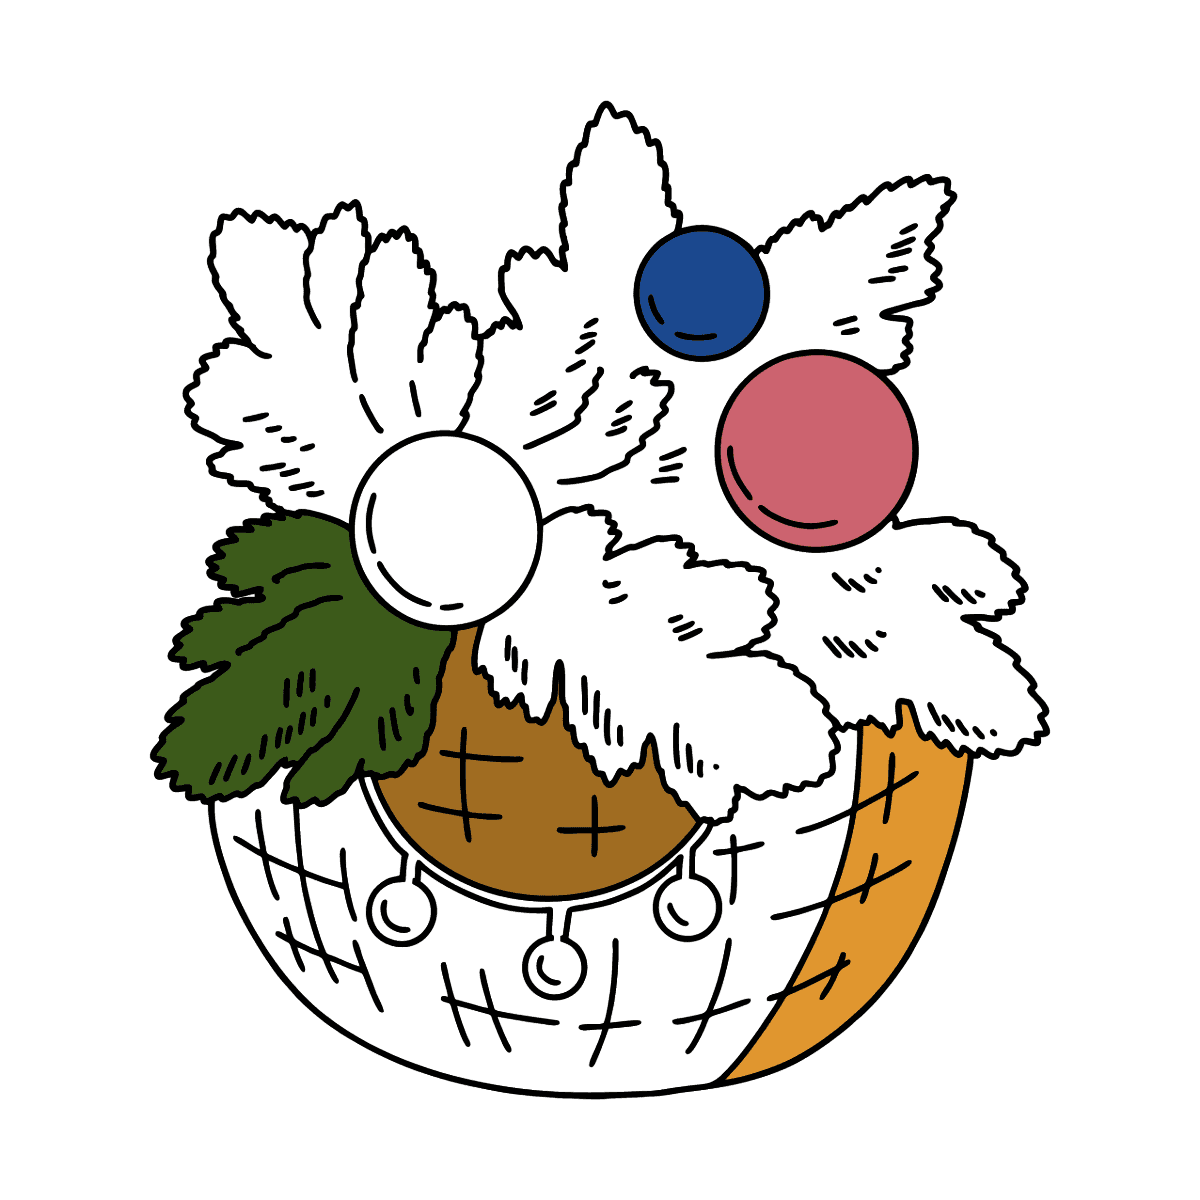 NEW COLORING PAGE